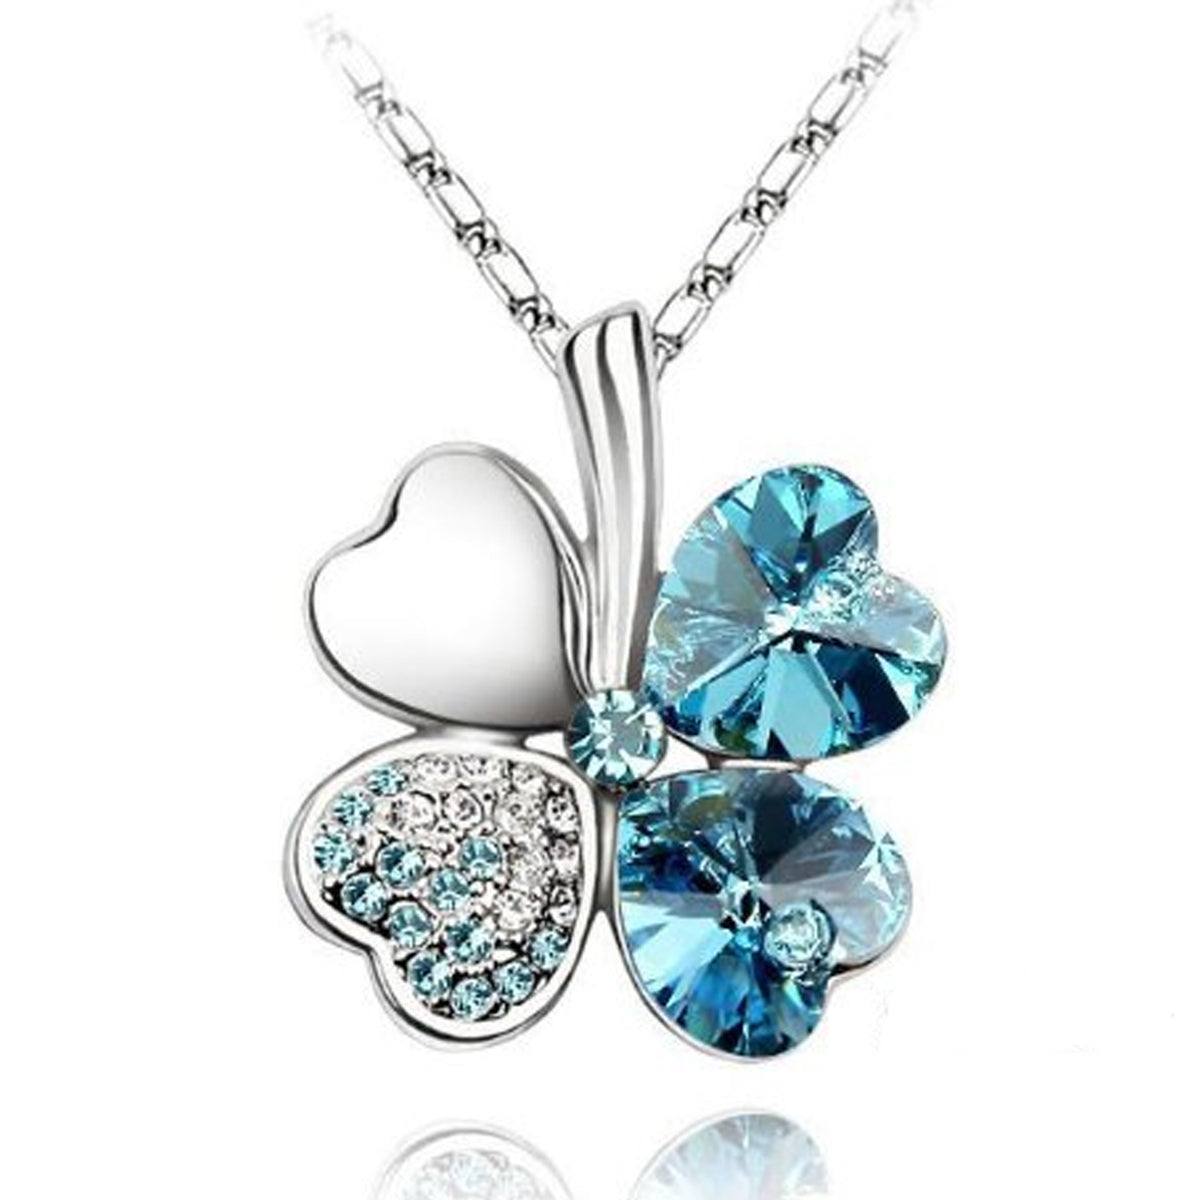 Mens Fashion Jewelry Pendant Necklace Four Leaf Clover, Rose Gold & Silver  Gift Link Chain With Love Heart Four Leaf Clover Pendant 2379 From Ai790,  $18.8 | DHgate.Com